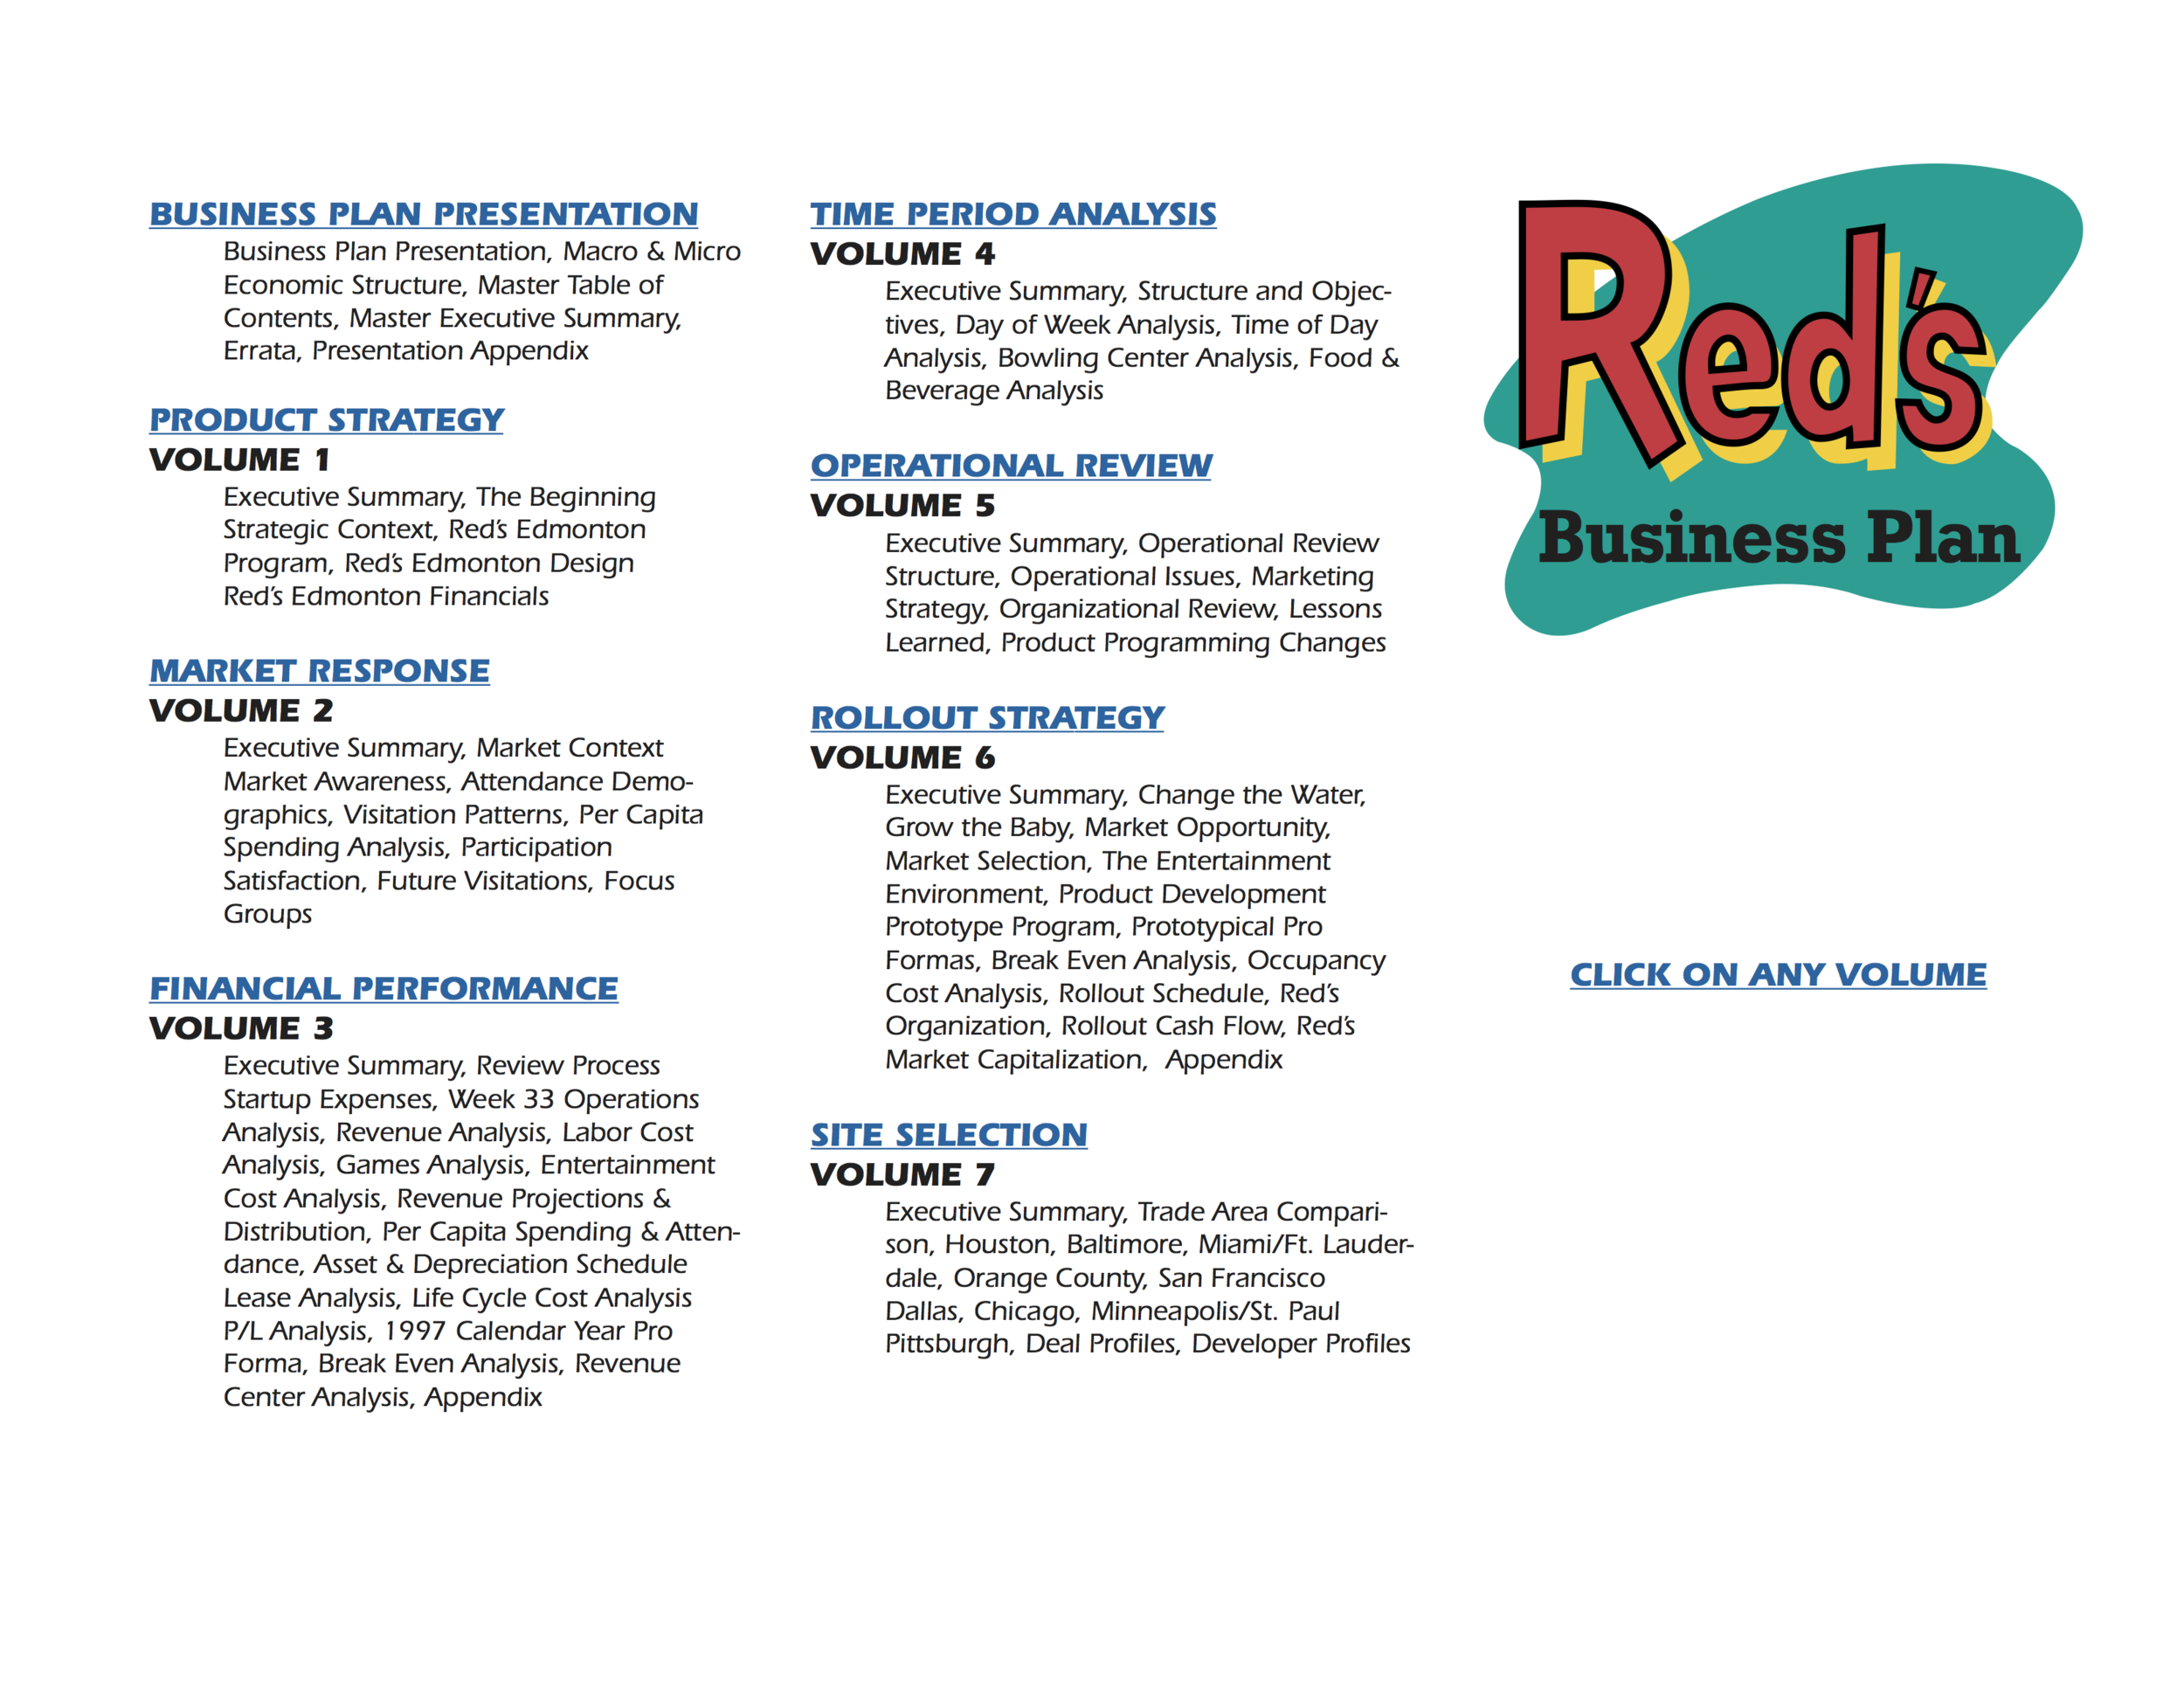 2. Red's Business Plan0 (dragged) 1.png